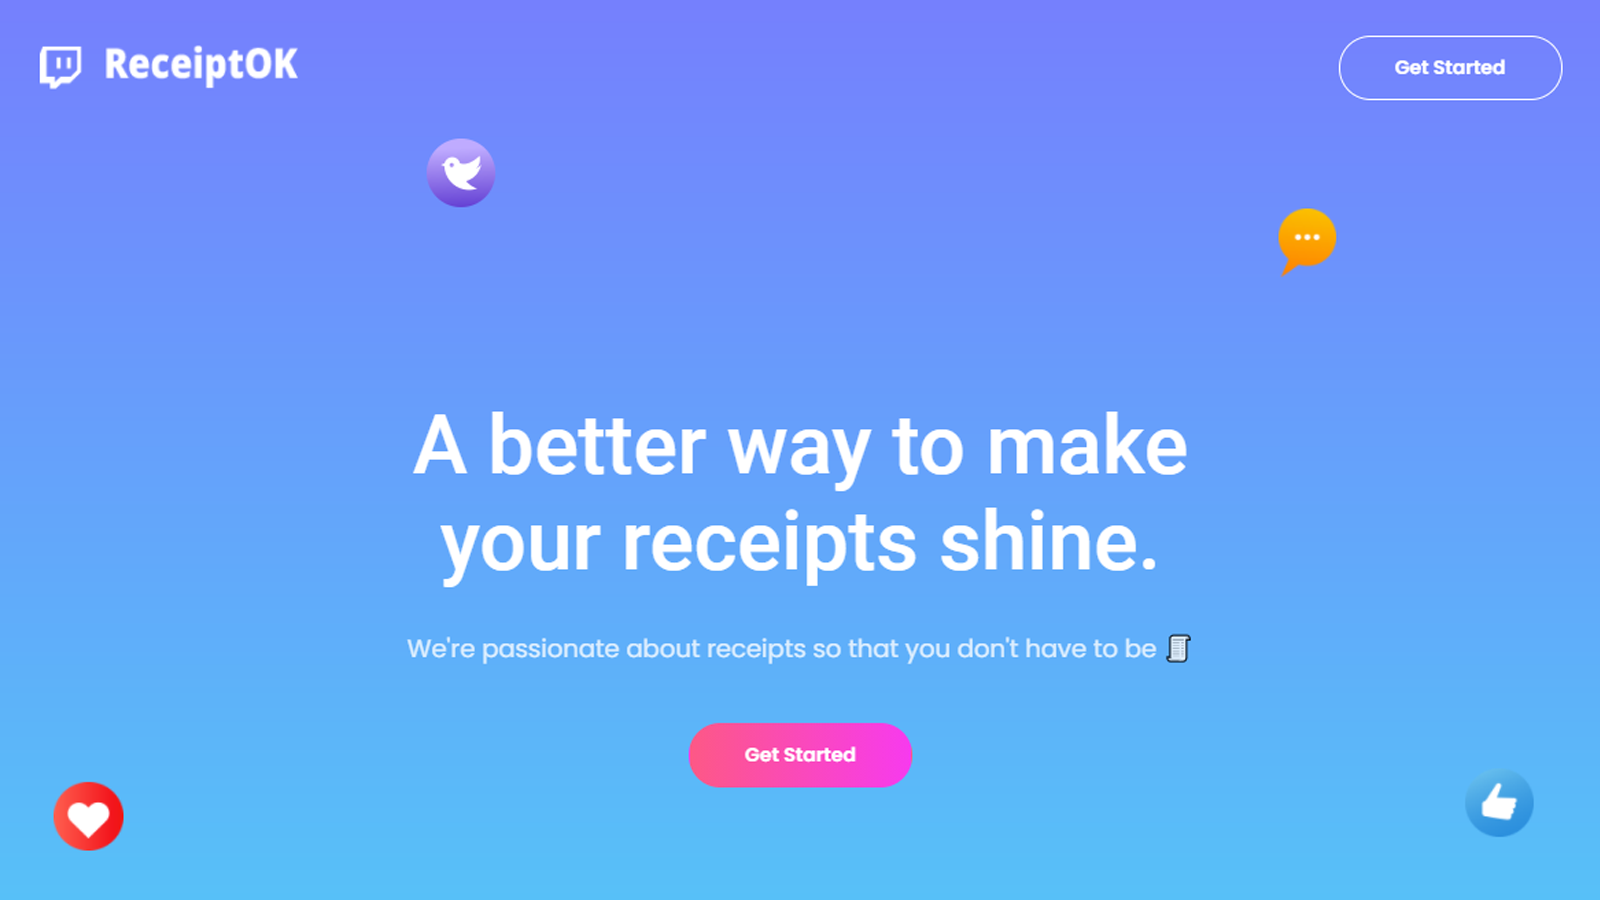 A better way to make your receipts shine